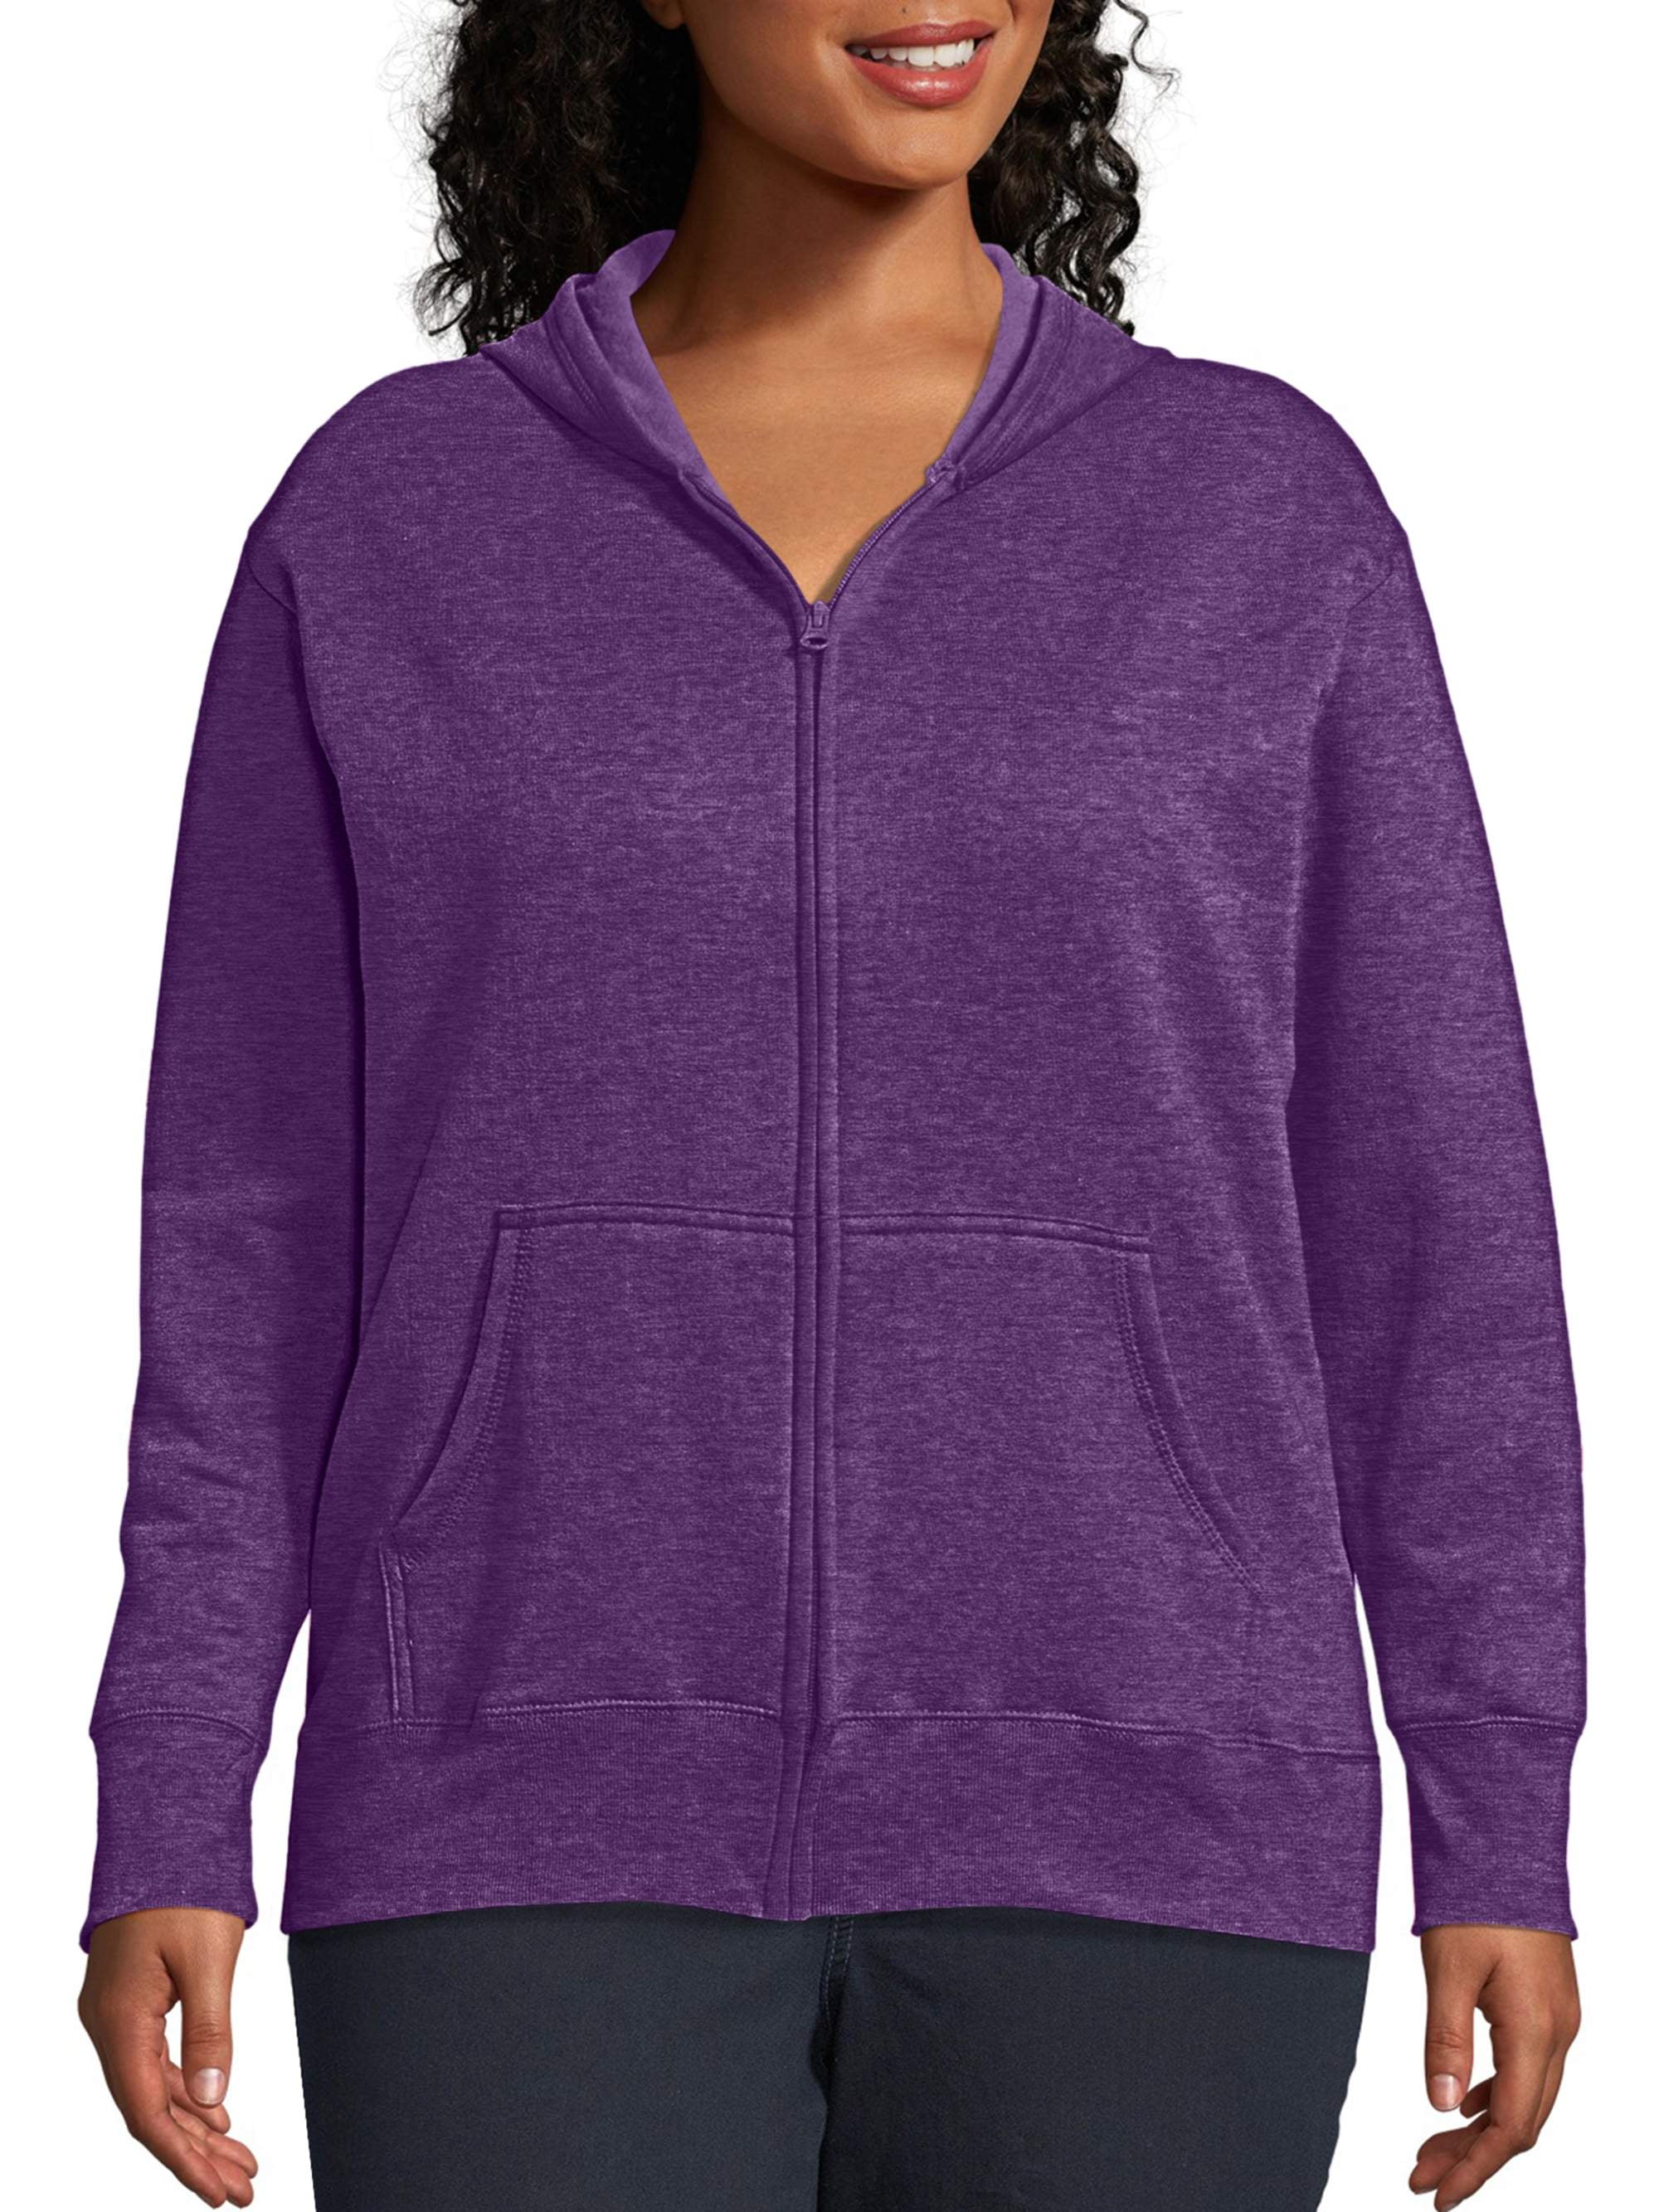 Details Womens Plus Size Zip Front Hooded Jacket